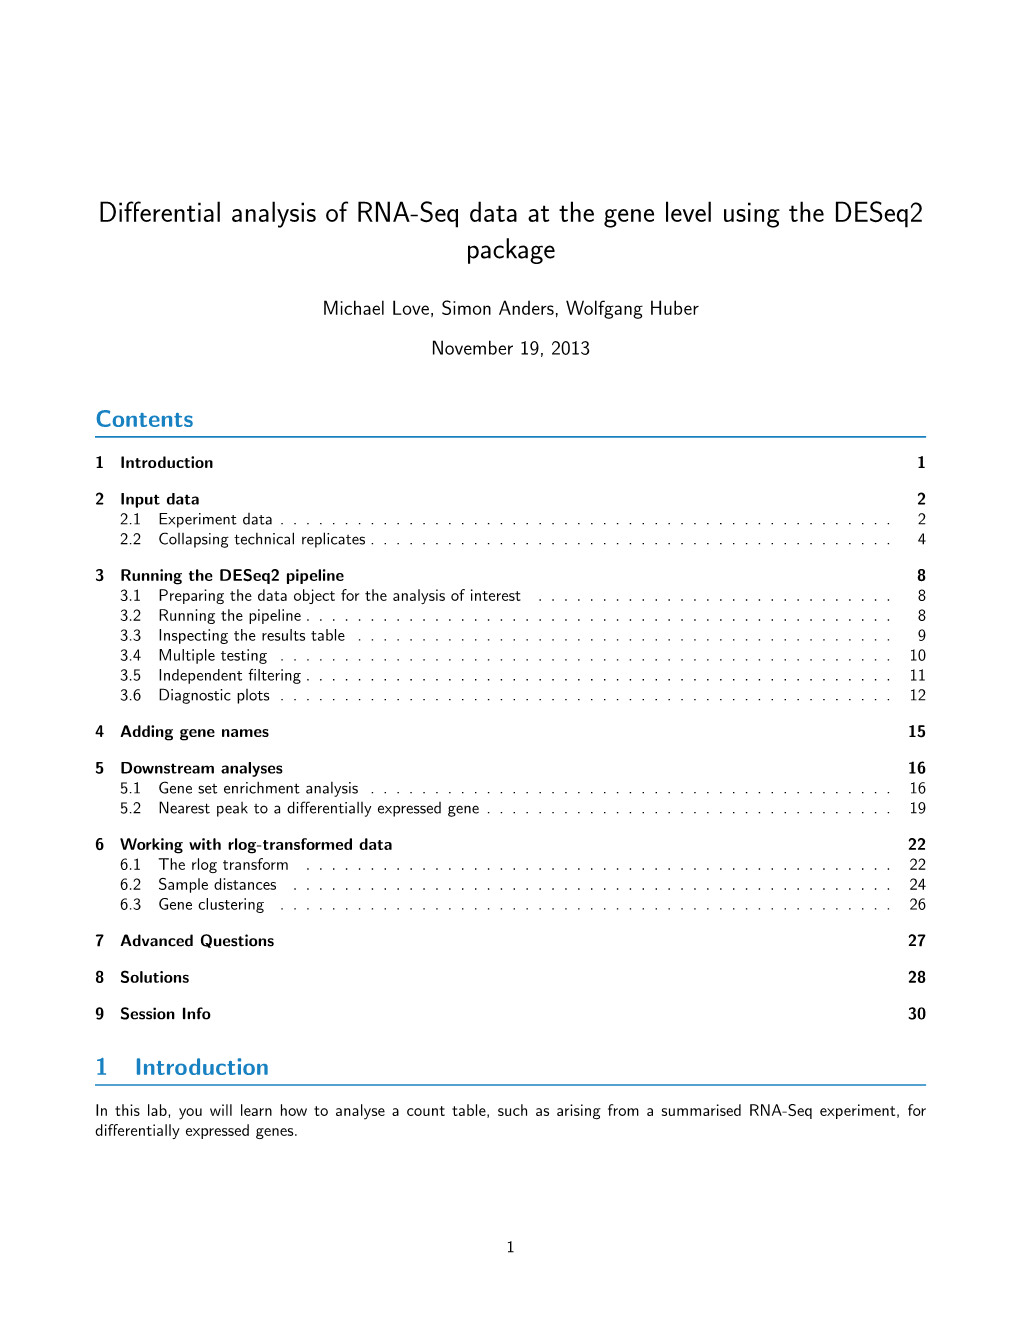 Differential Analysis of RNA-Seq Data at the Gene Level Using the Deseq2